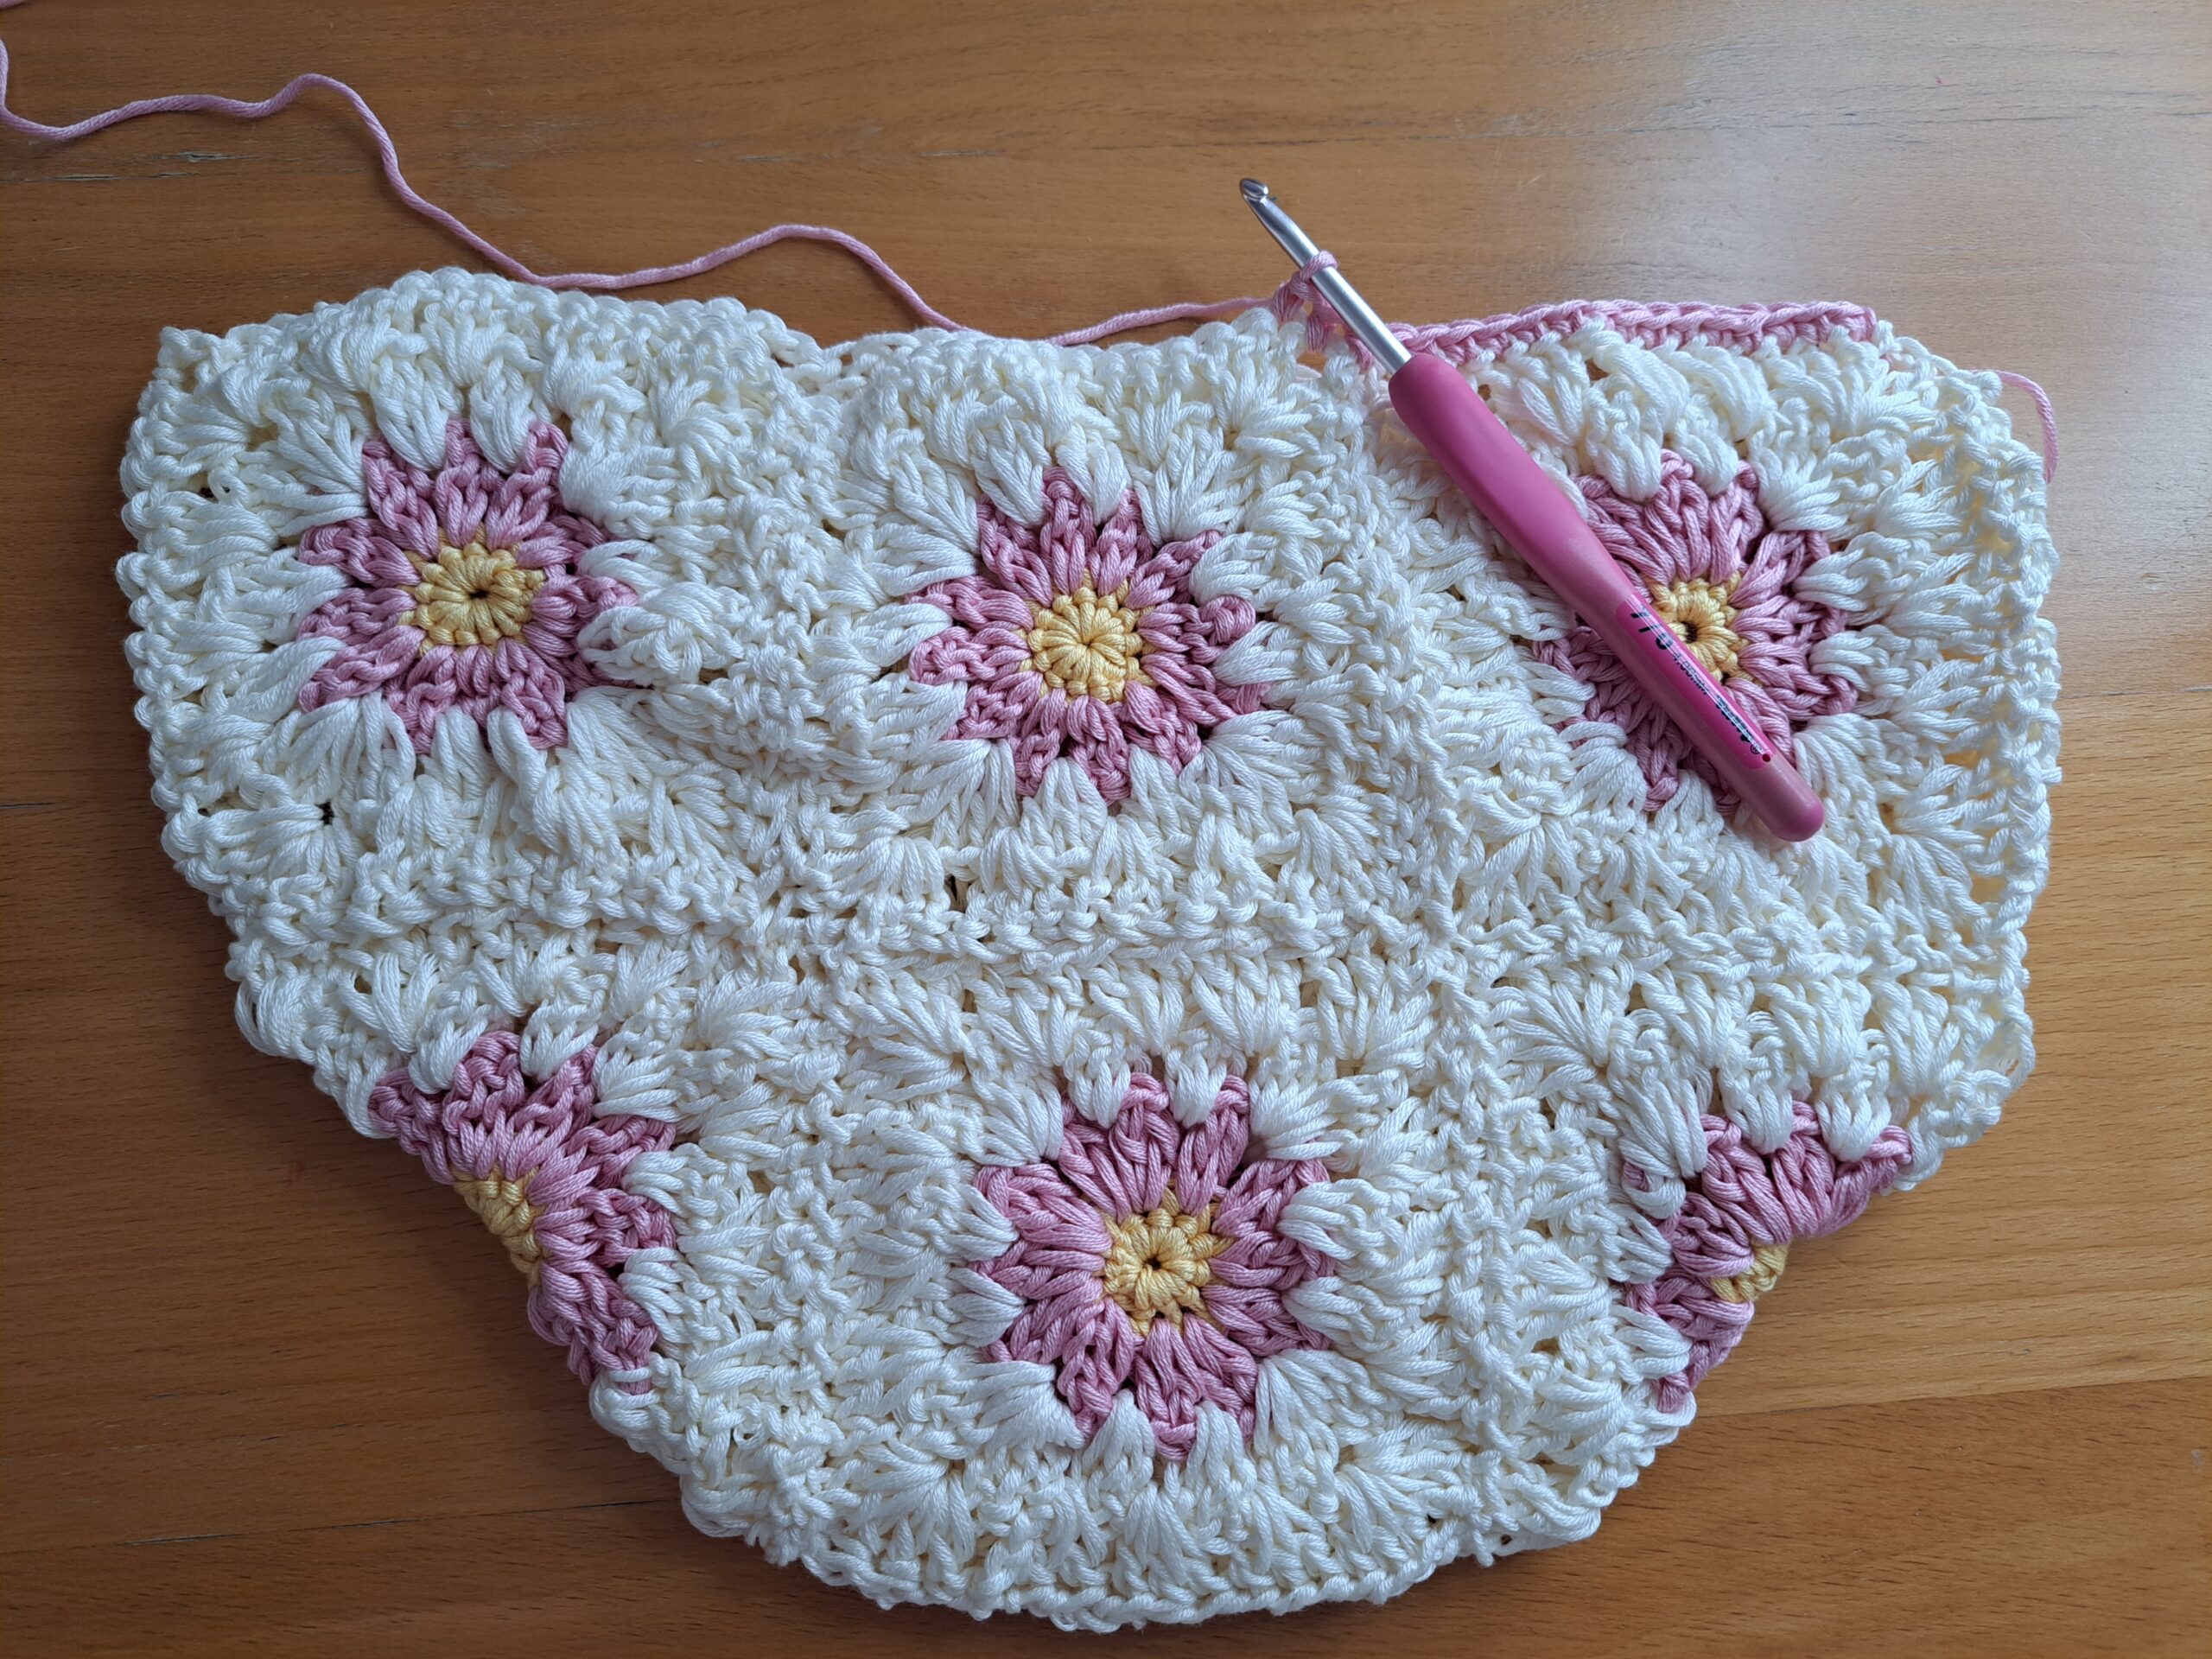 Crochet the edging on the top opening of the bag